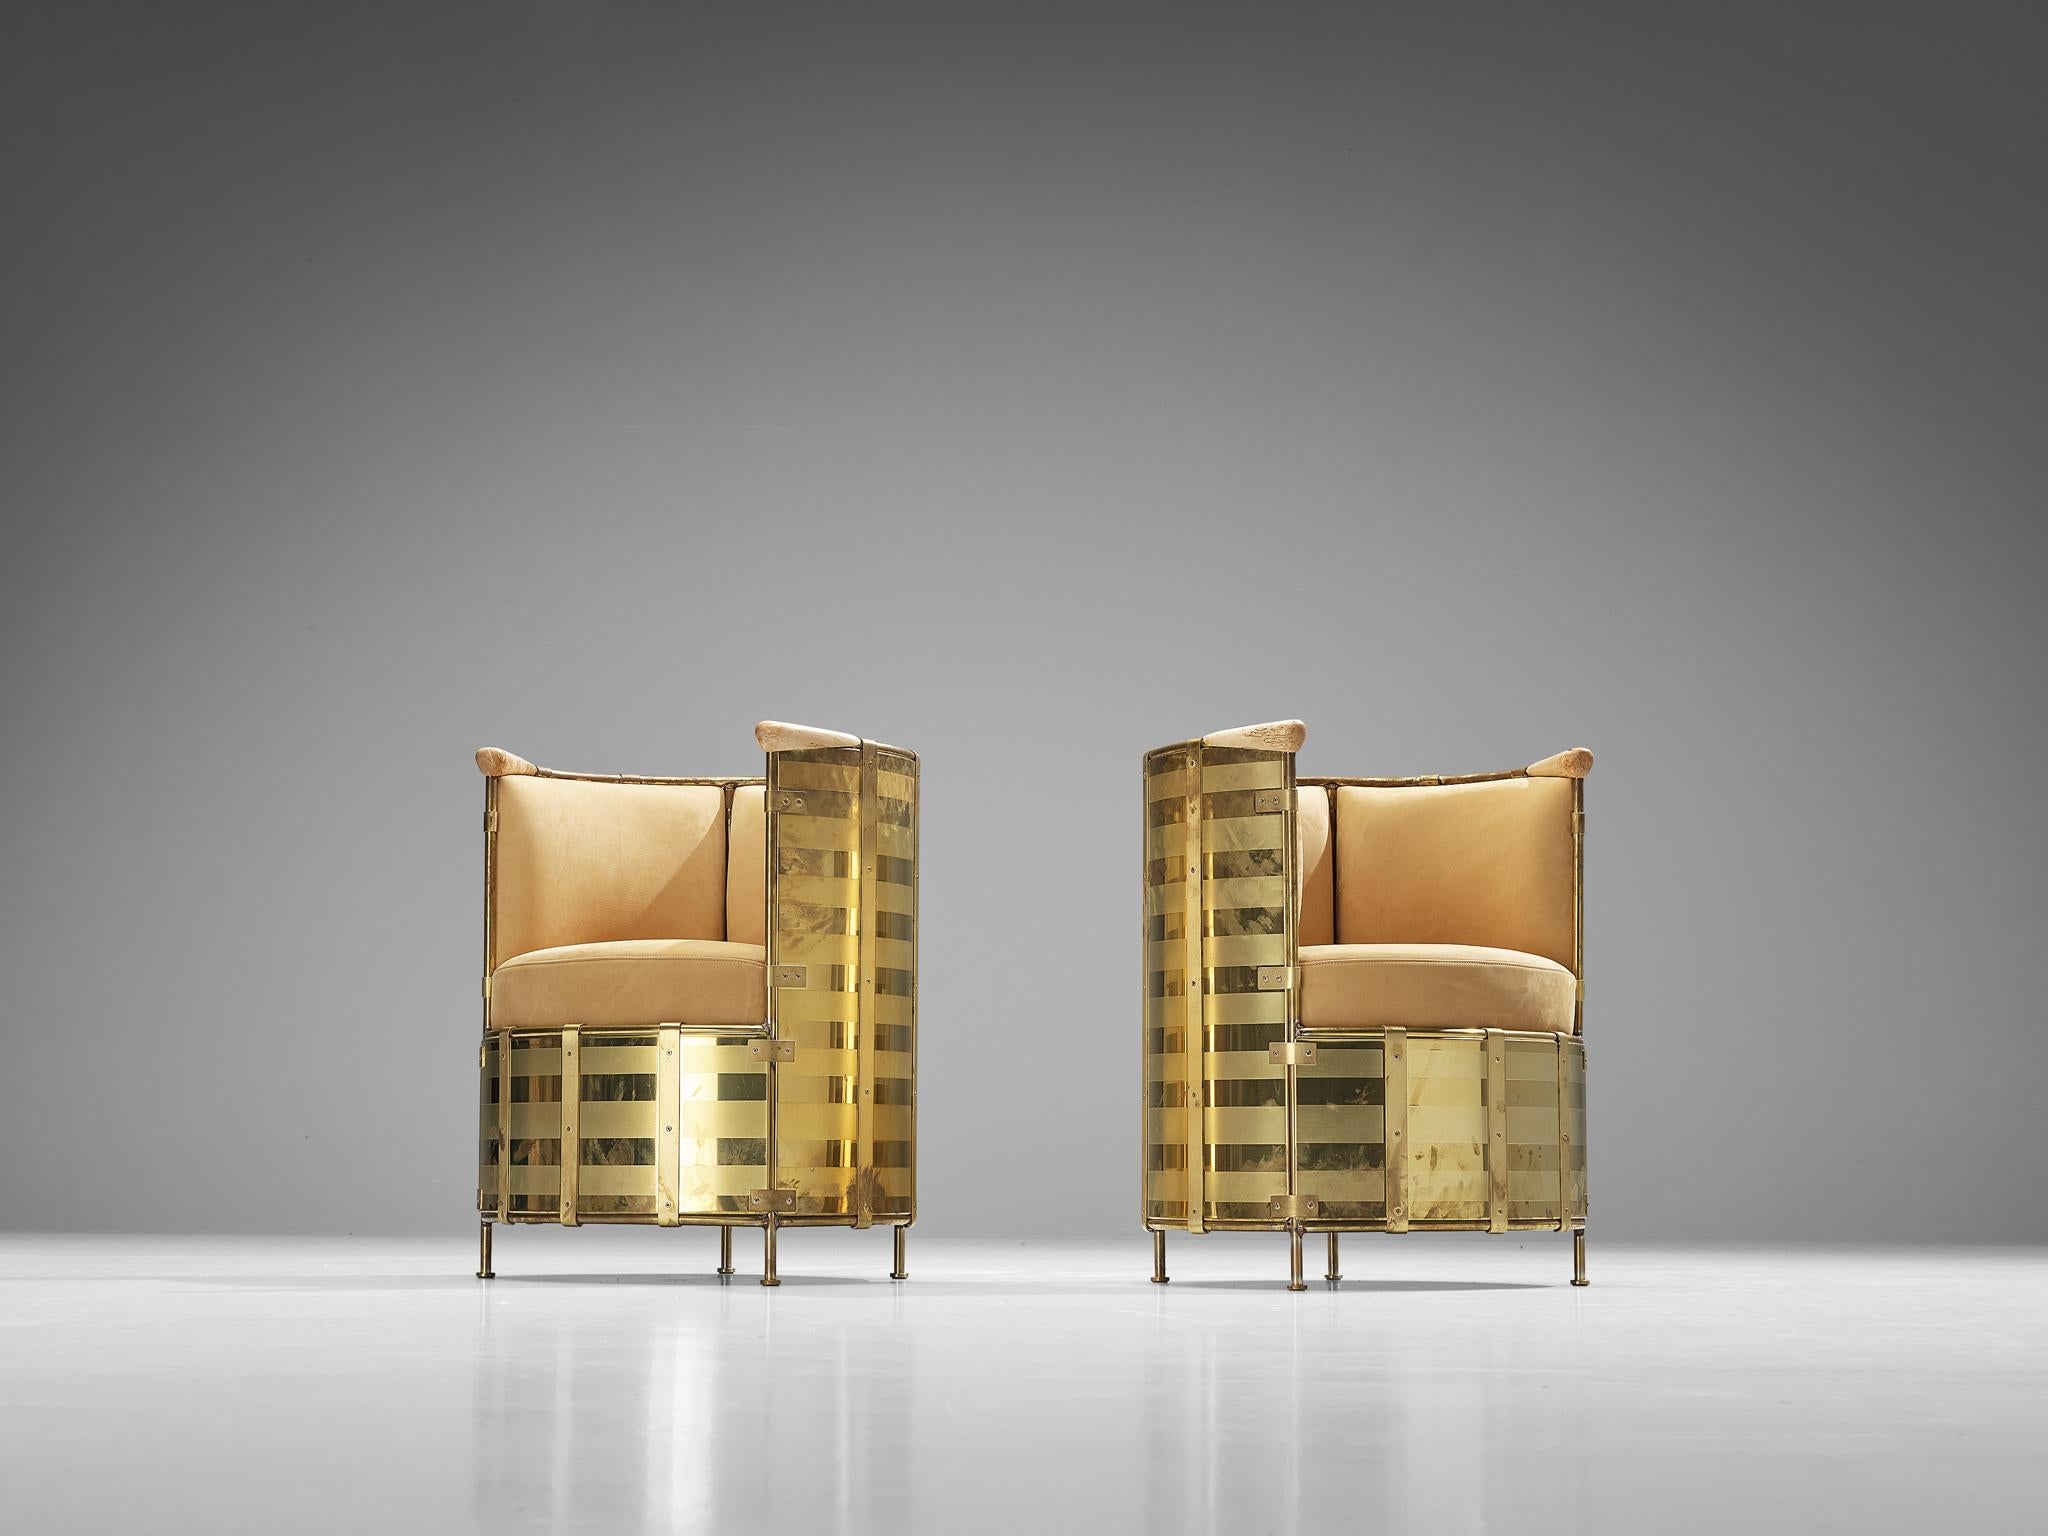 Mats Theselius for Källemo AB, pair of lounge chairs 'El Dorado’, limited edition, brass, nubuck leather, maple, Sweden, 2002

These distinct 'El Dorado’ lounge chairs by Mats Theselius were designed in 2002 for the 11th anniversary of the earlier